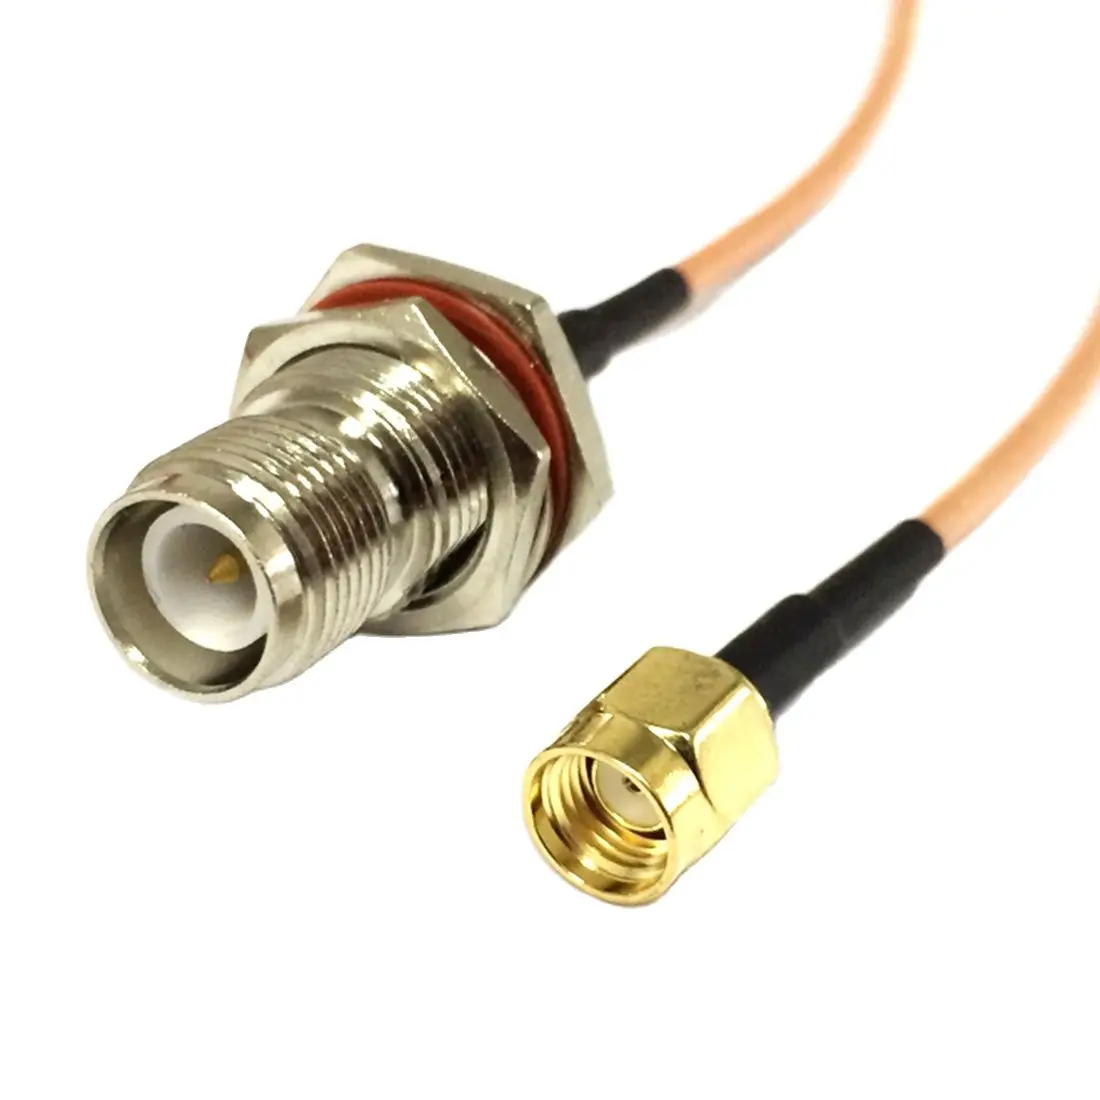 

1PC WifiRouter Extension Cable RP- SMA Male Plug To RP-TNC Female Bulkhead RG316 Pigtail 15CM 6"/30CM/50CM/100CM Adapter